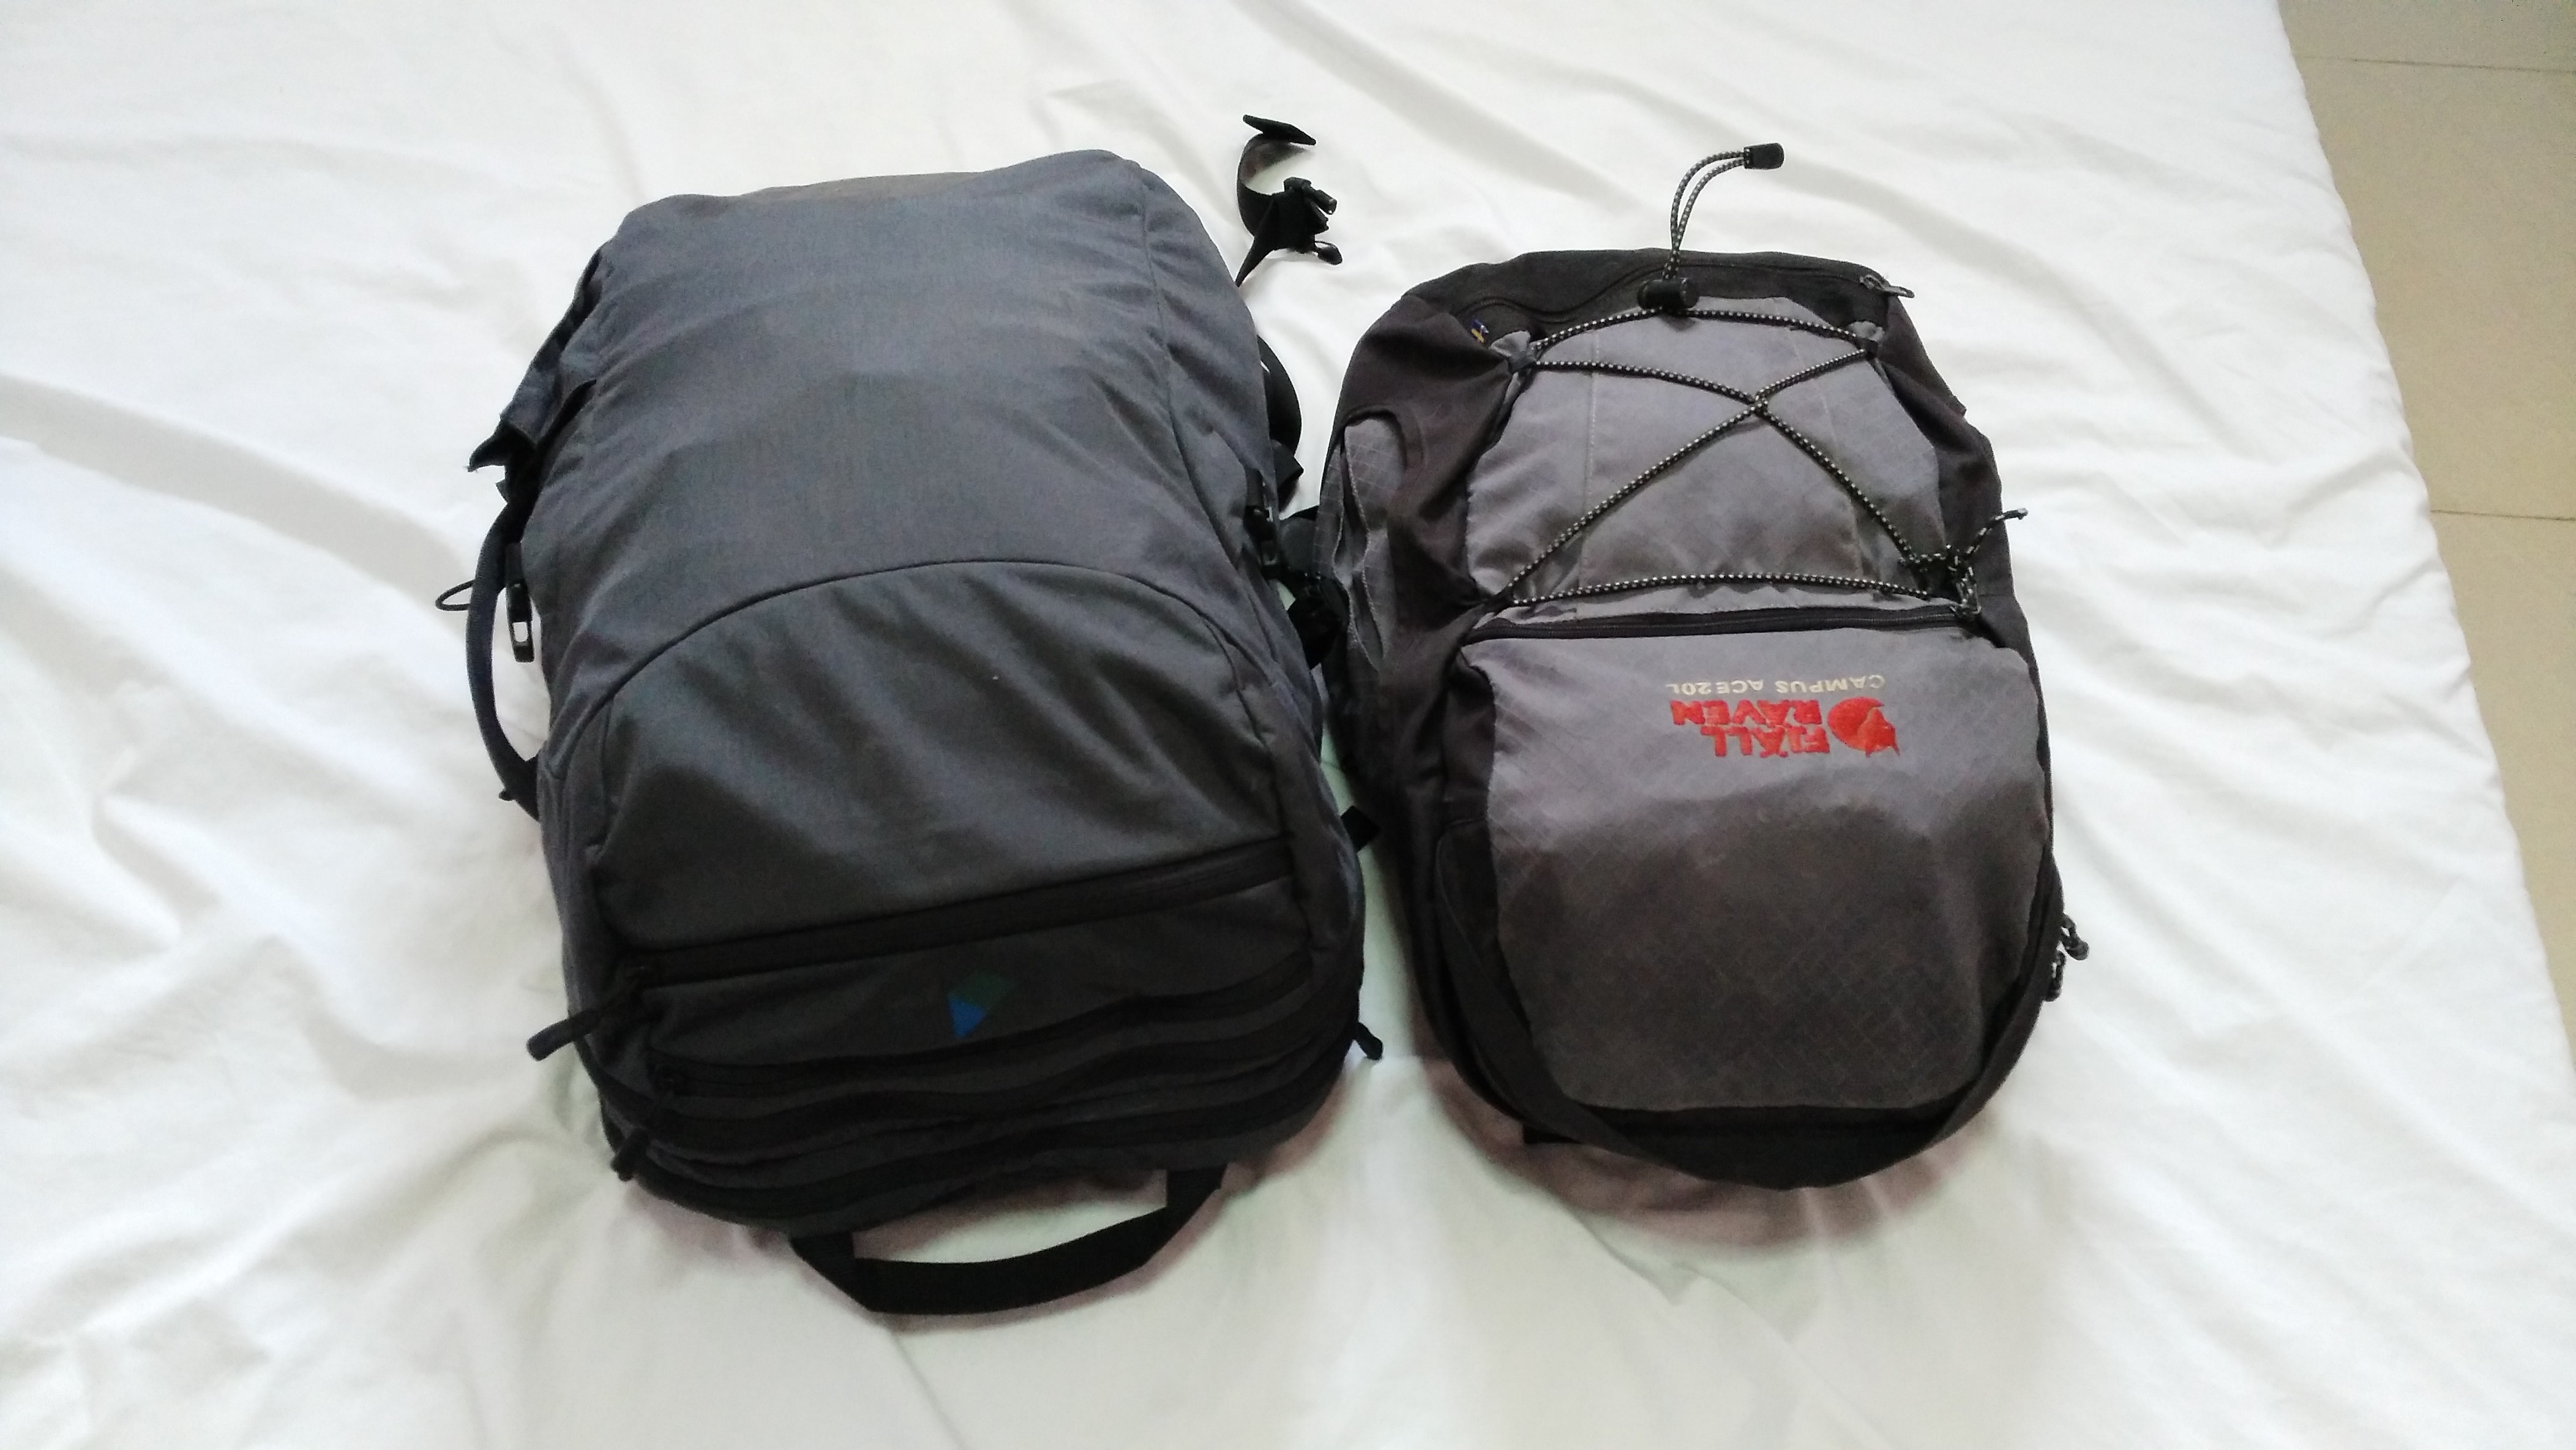 My two packed bags